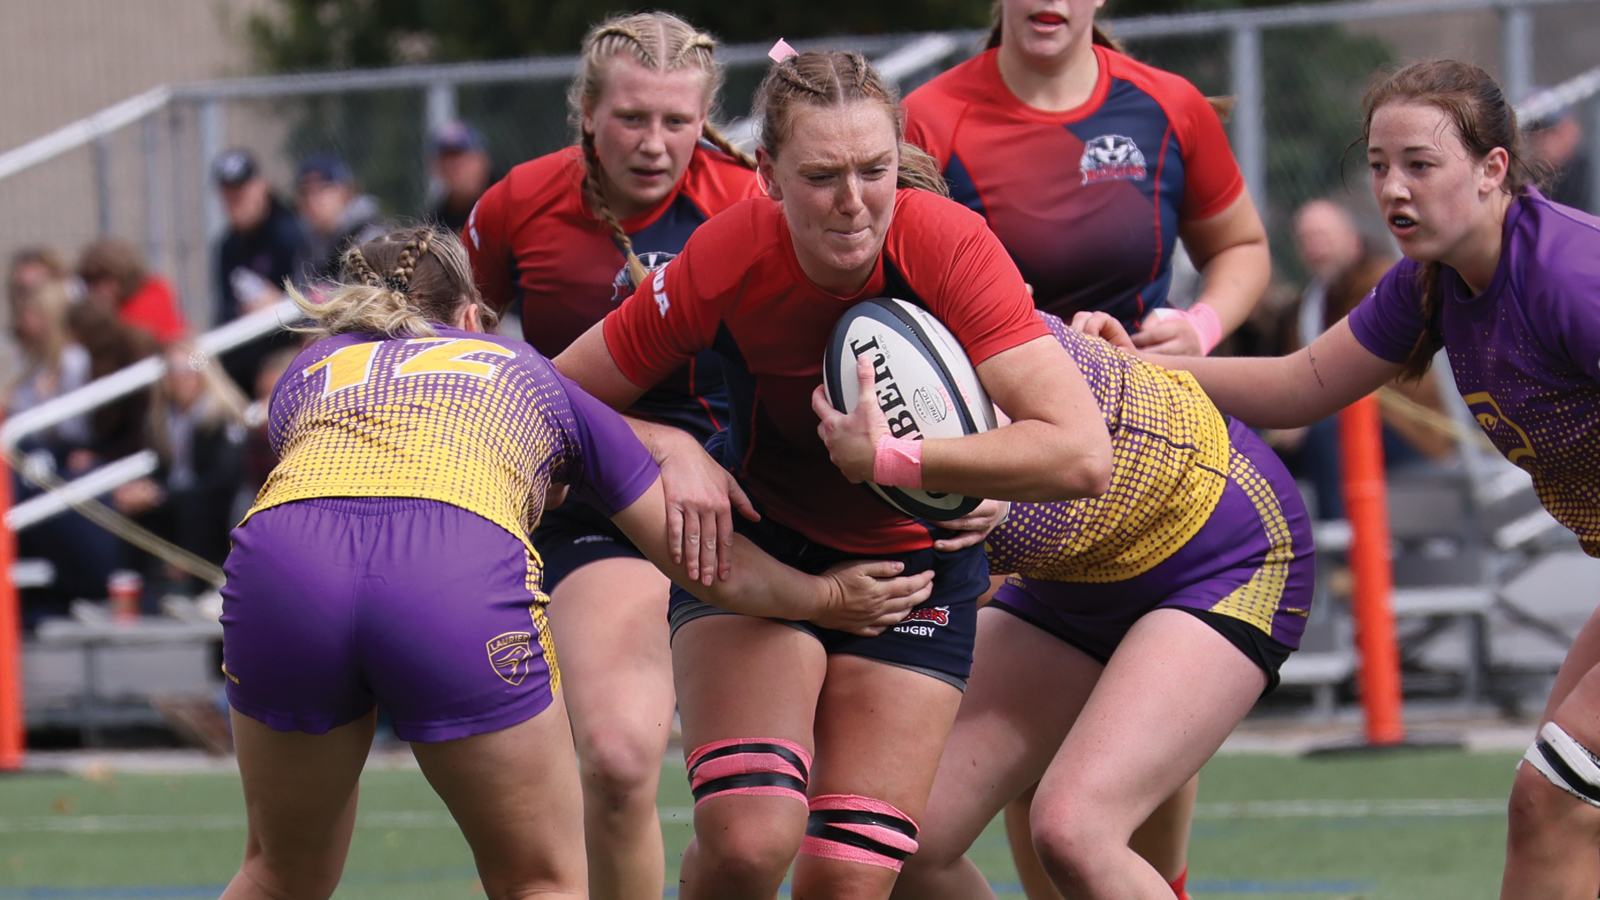 Action photo of Brock women's rugby player Lily Freiburger running with the ball during a game while being tackled by two opposing Laurier players